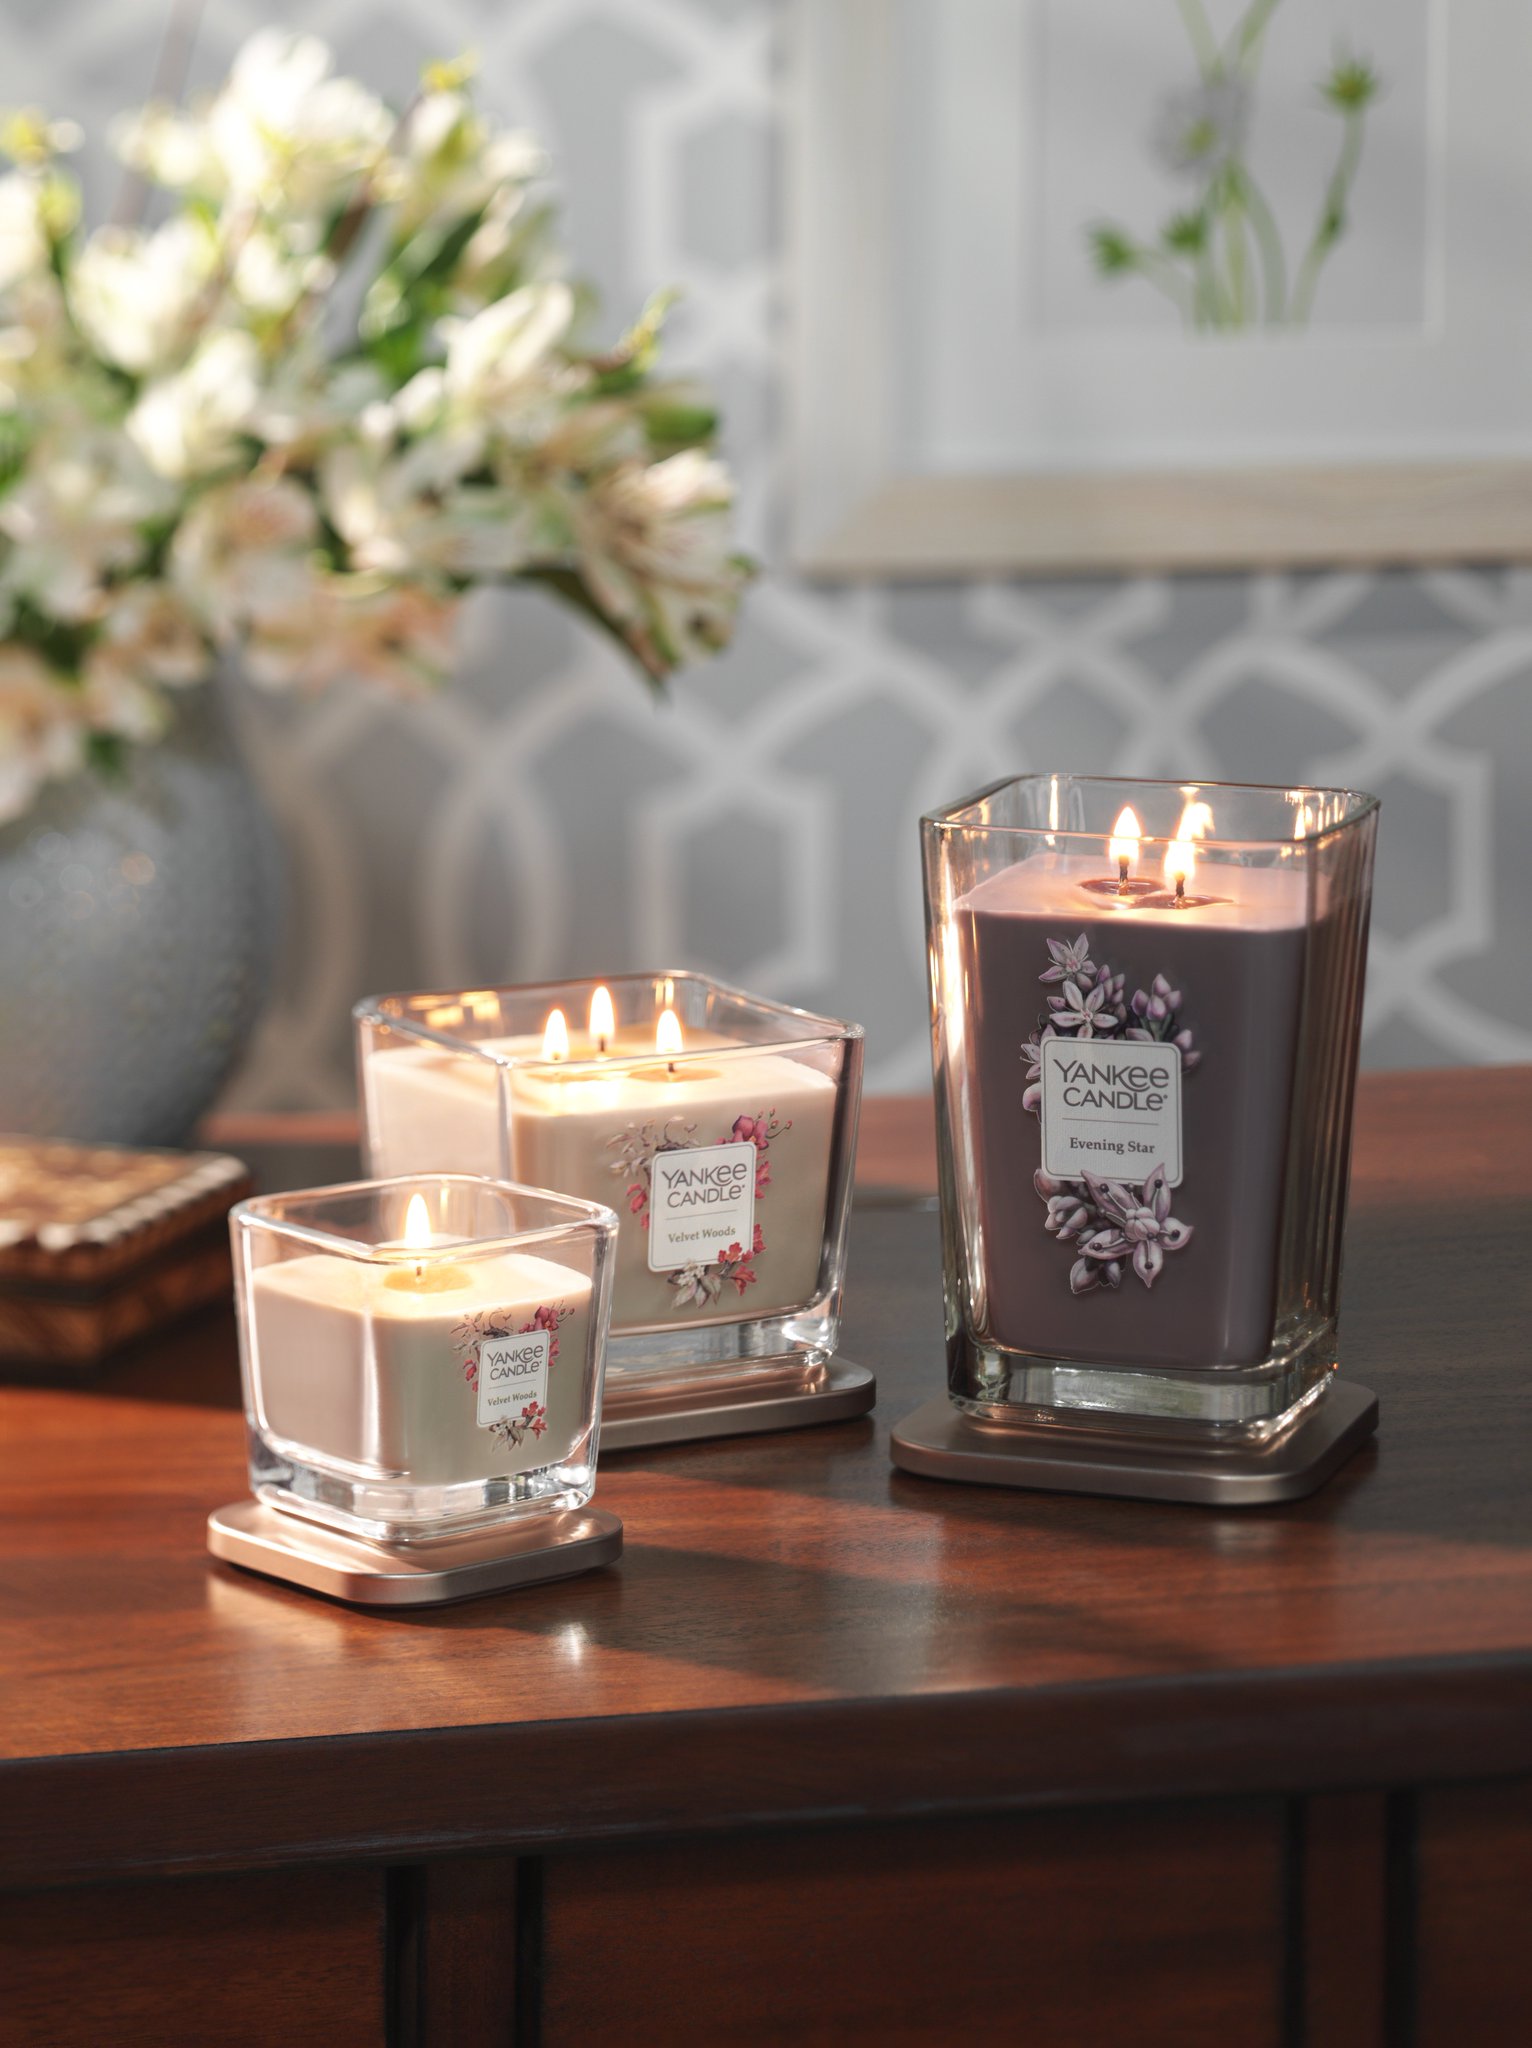 Yankee Candle on Twitter: "Take Style to New Heights with our Yankee